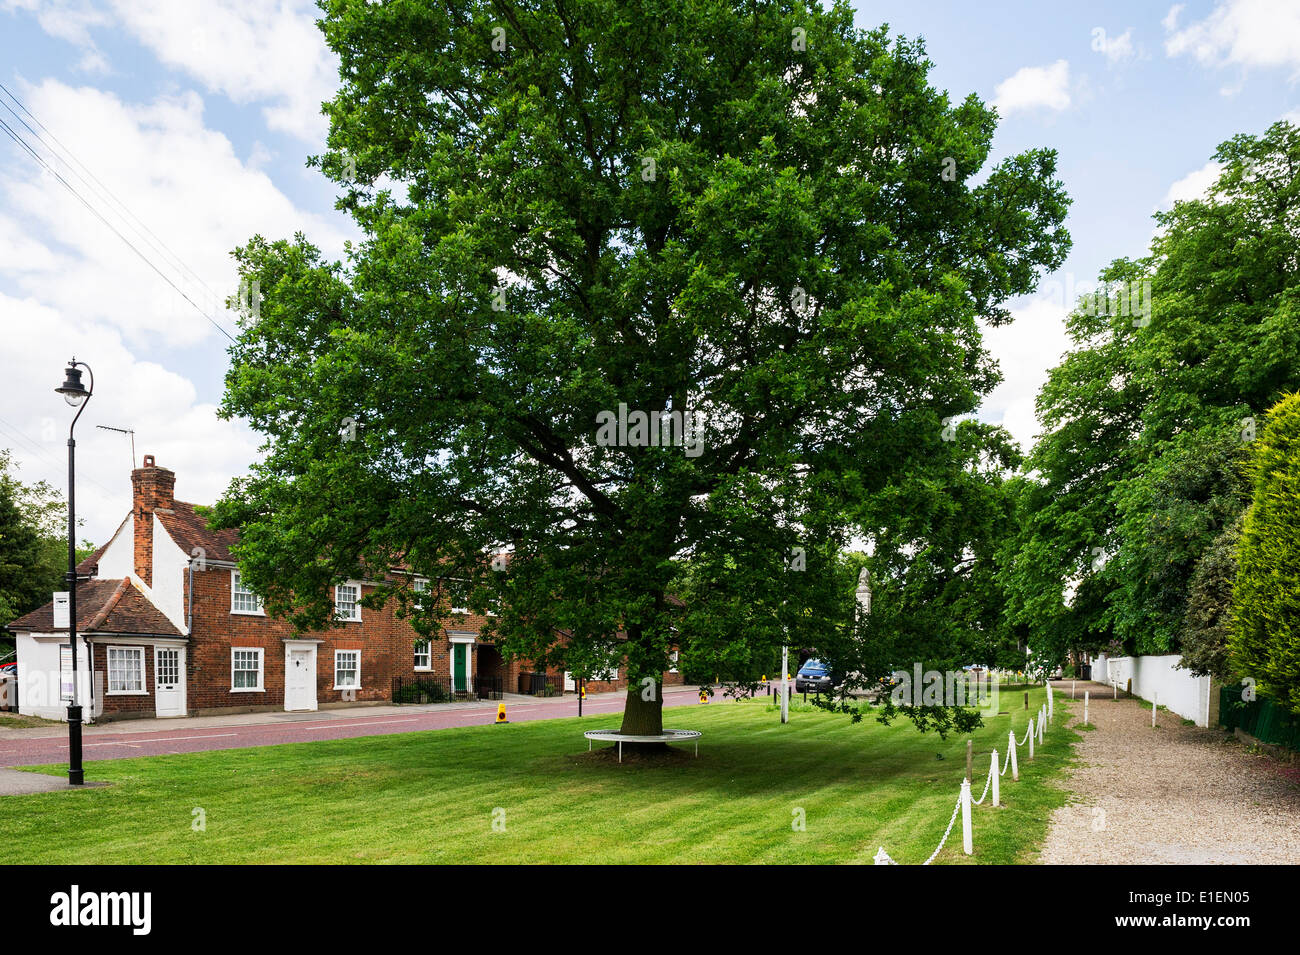 The village of Stock in Essex UK. Stock Photo